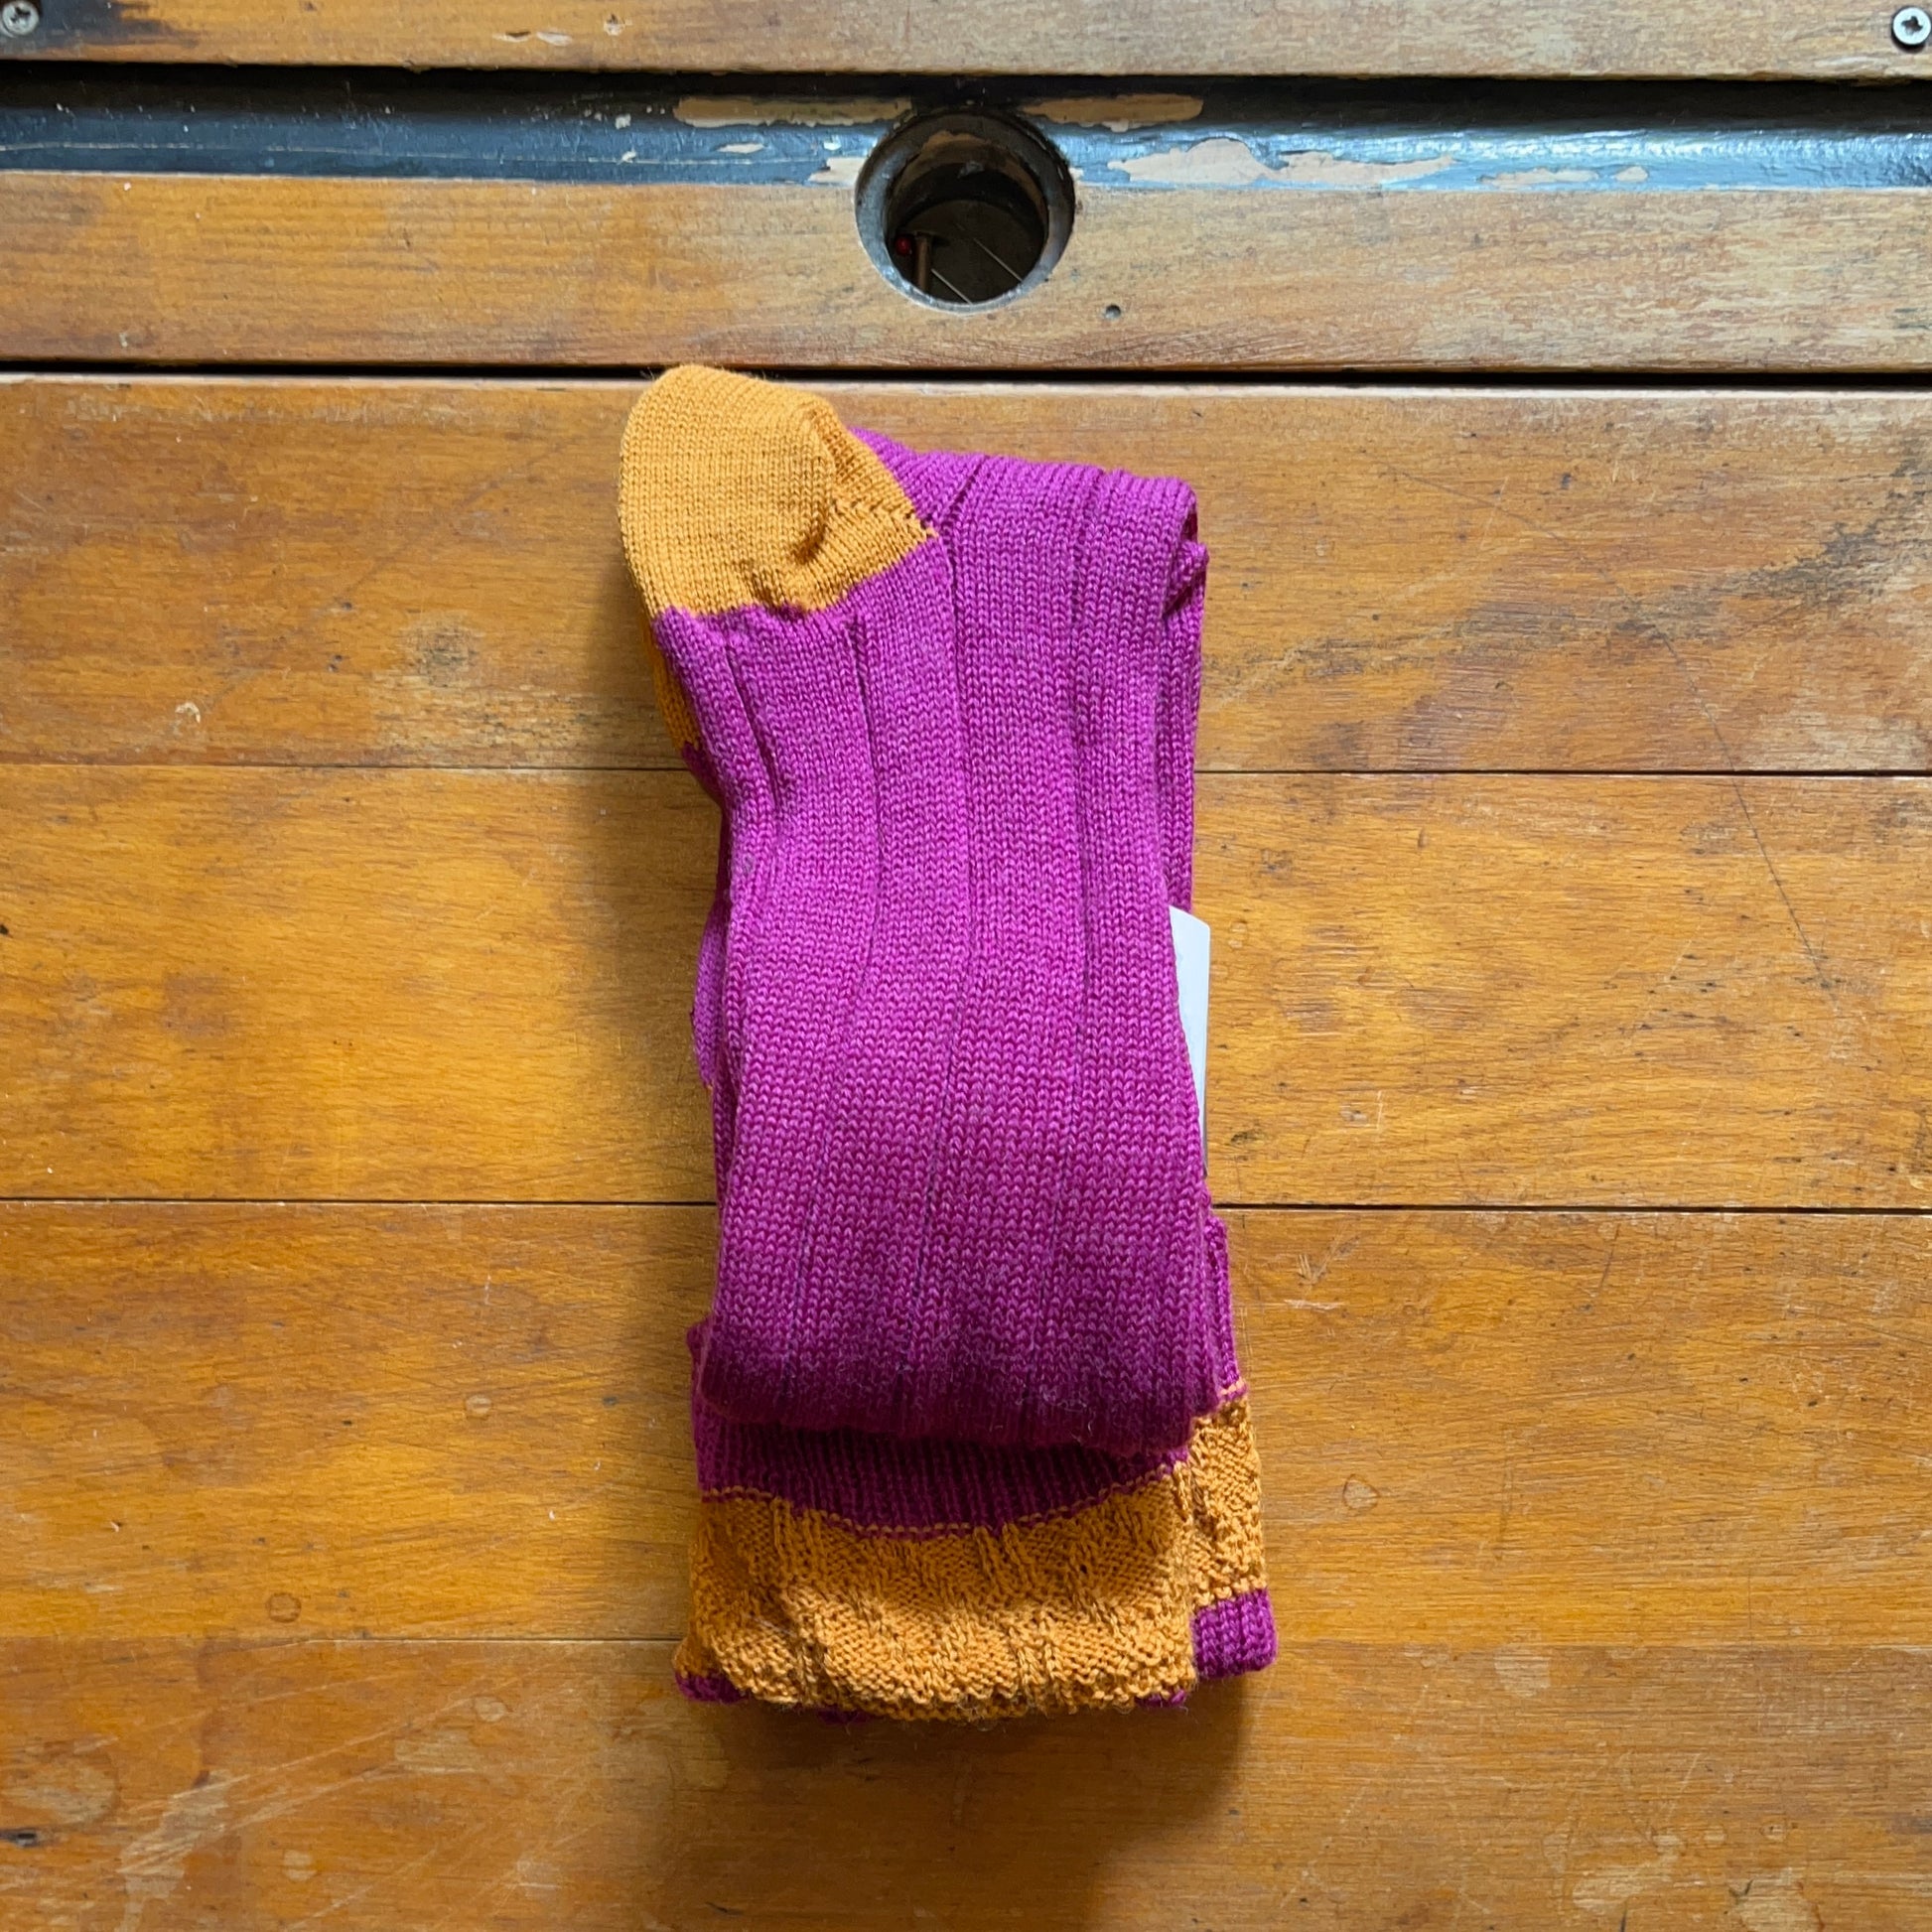 Raspbery coloured woollen boot sock with contrasting ginger cuff